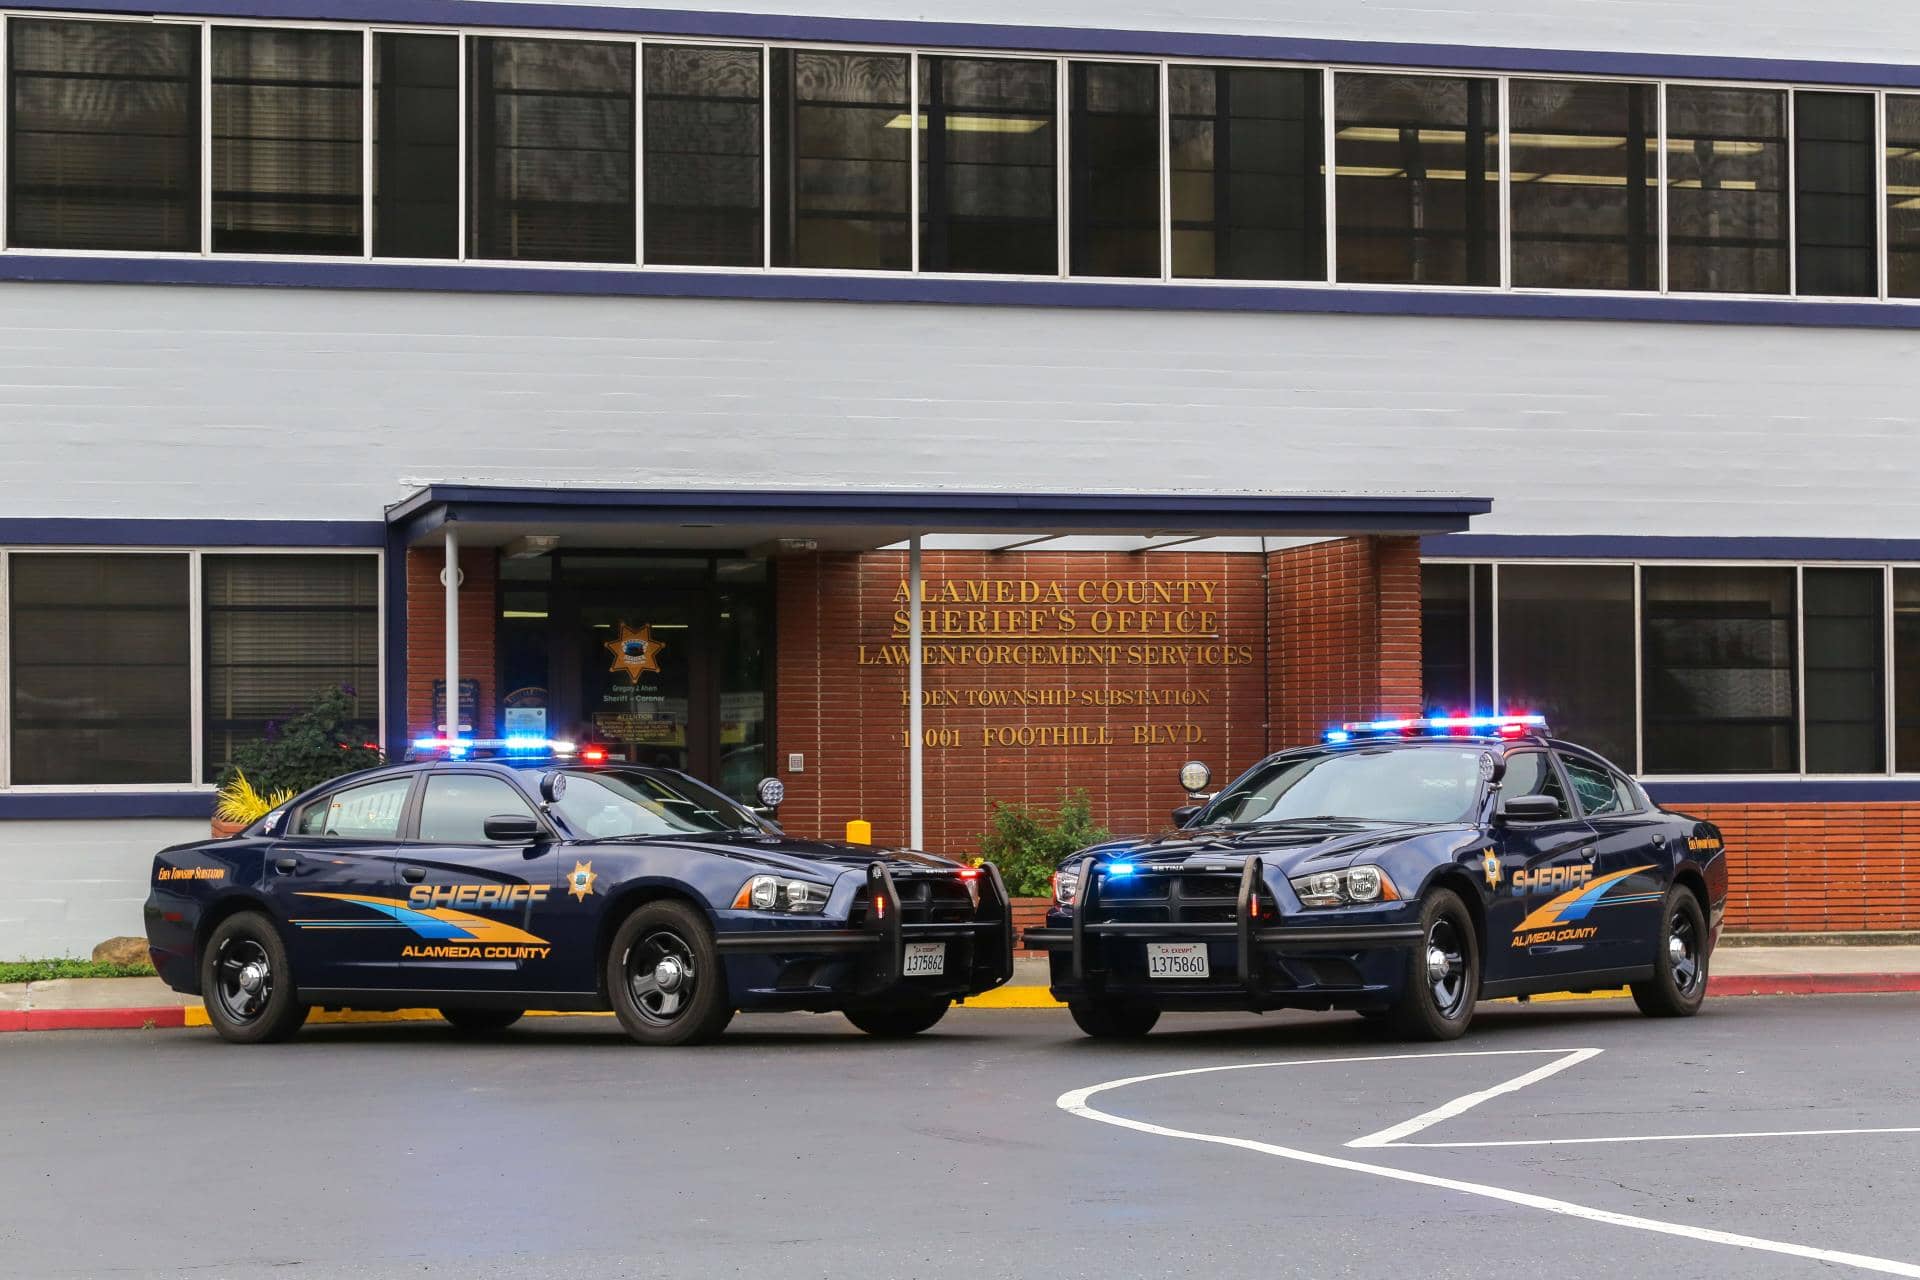 Image of Alameda County Sheriff's Office